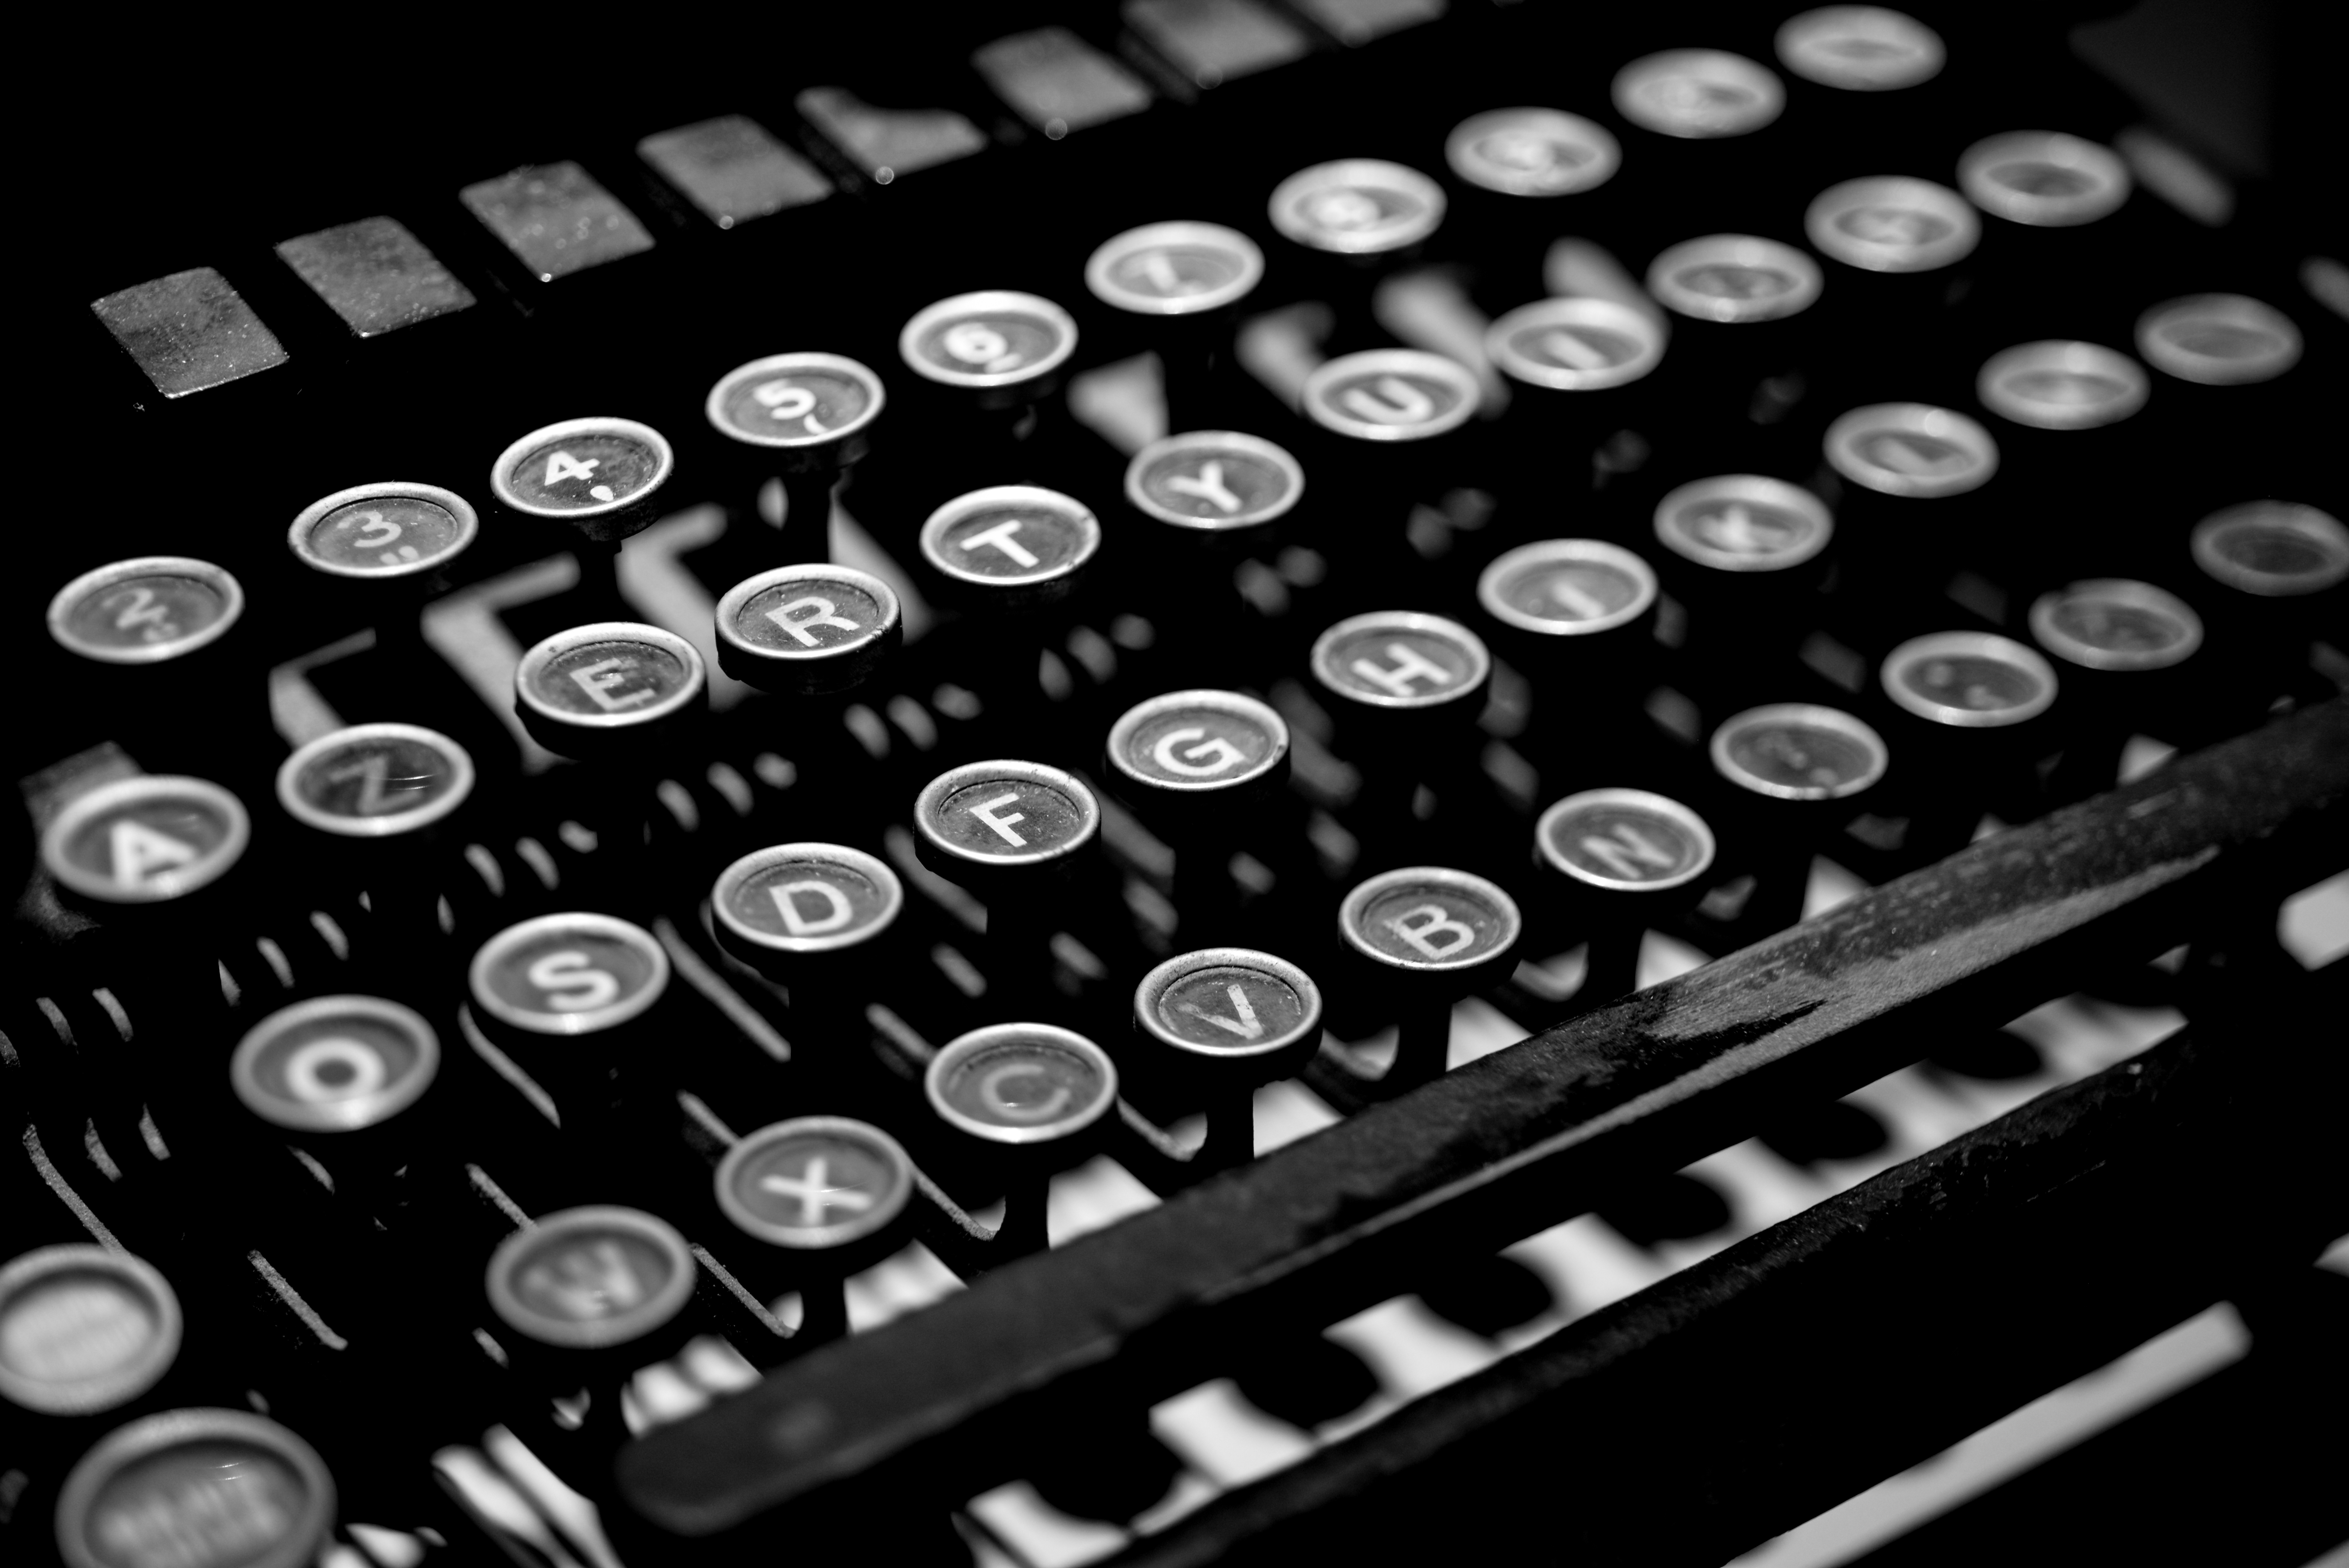 54051 download wallpaper miscellanea, miscellaneous, typography, keys, typewriter, printing house screensavers and pictures for free